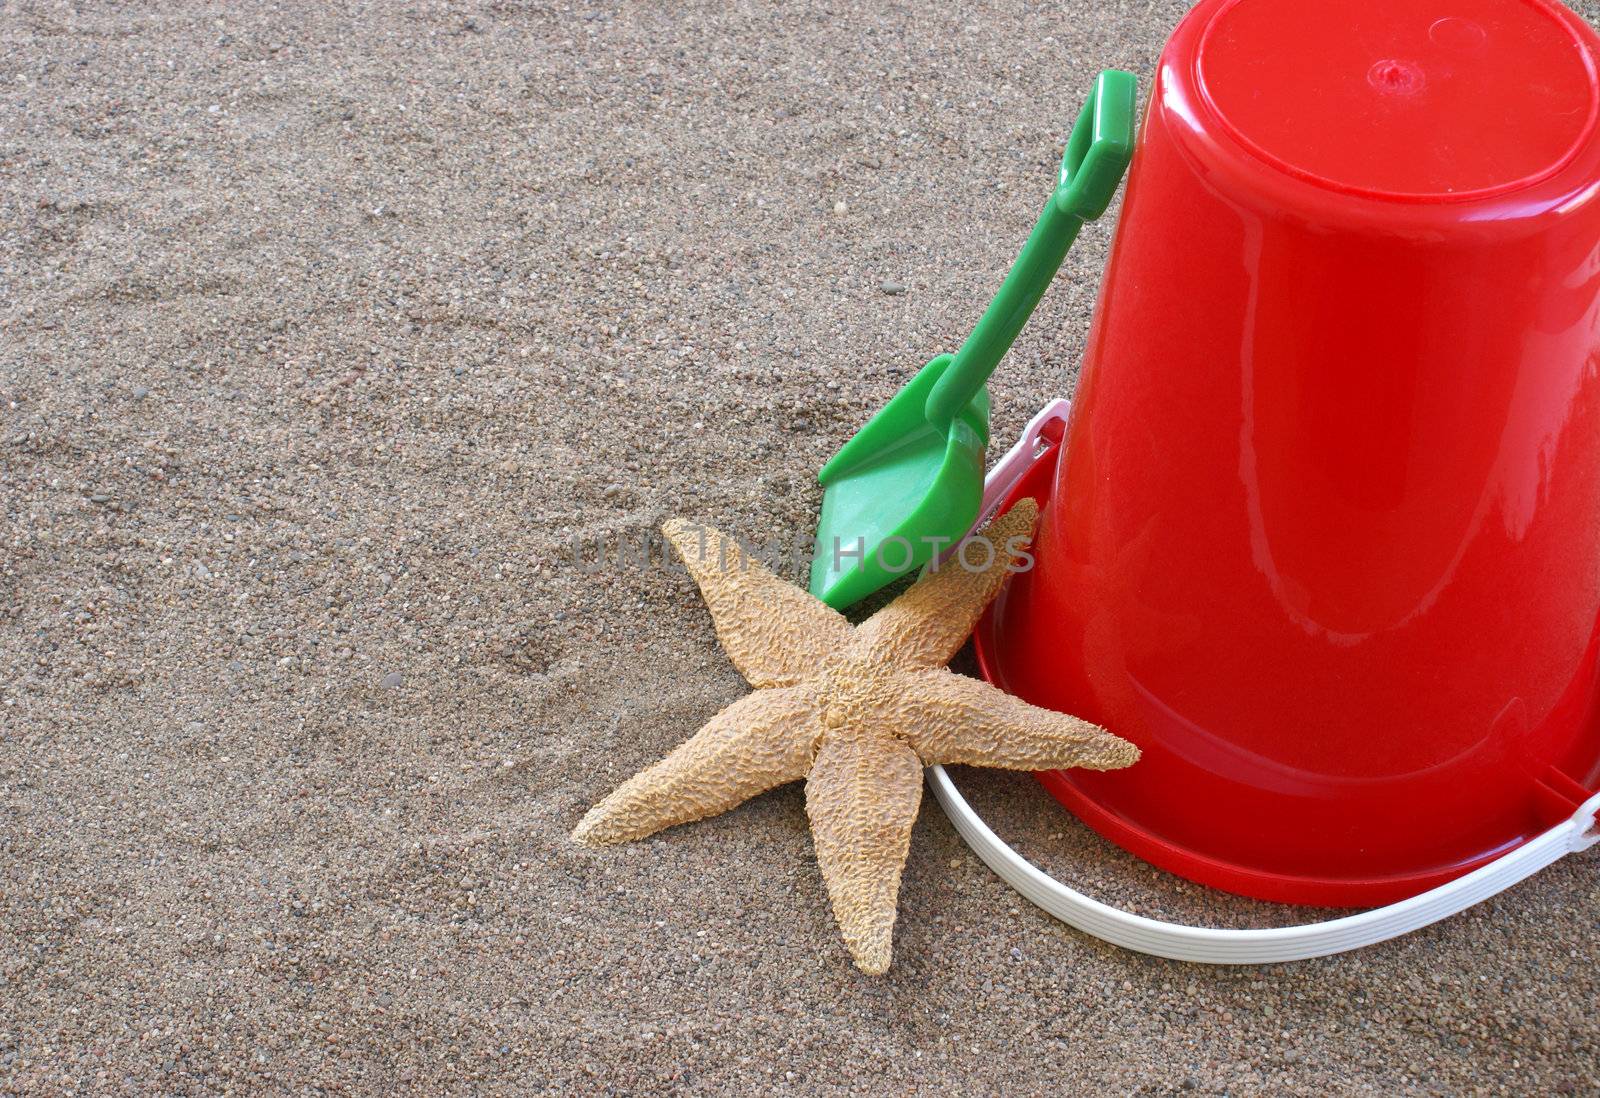 A shovel, bucket and starfish in the sand.